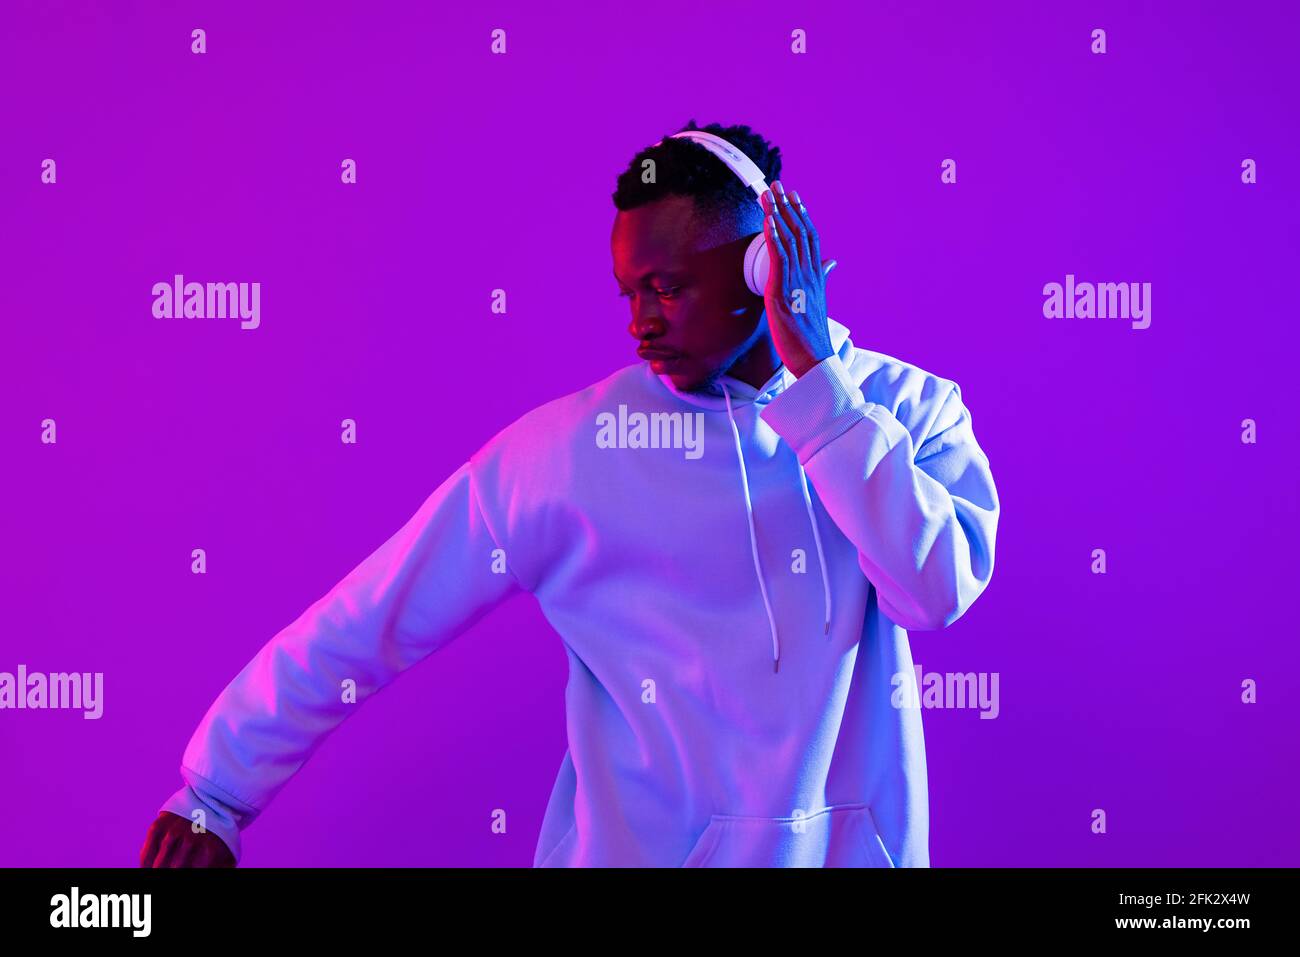 Young handsome African man wearing headphones listening to music and dancing in futuristic purple cyberpunk neon light background Stock Photo